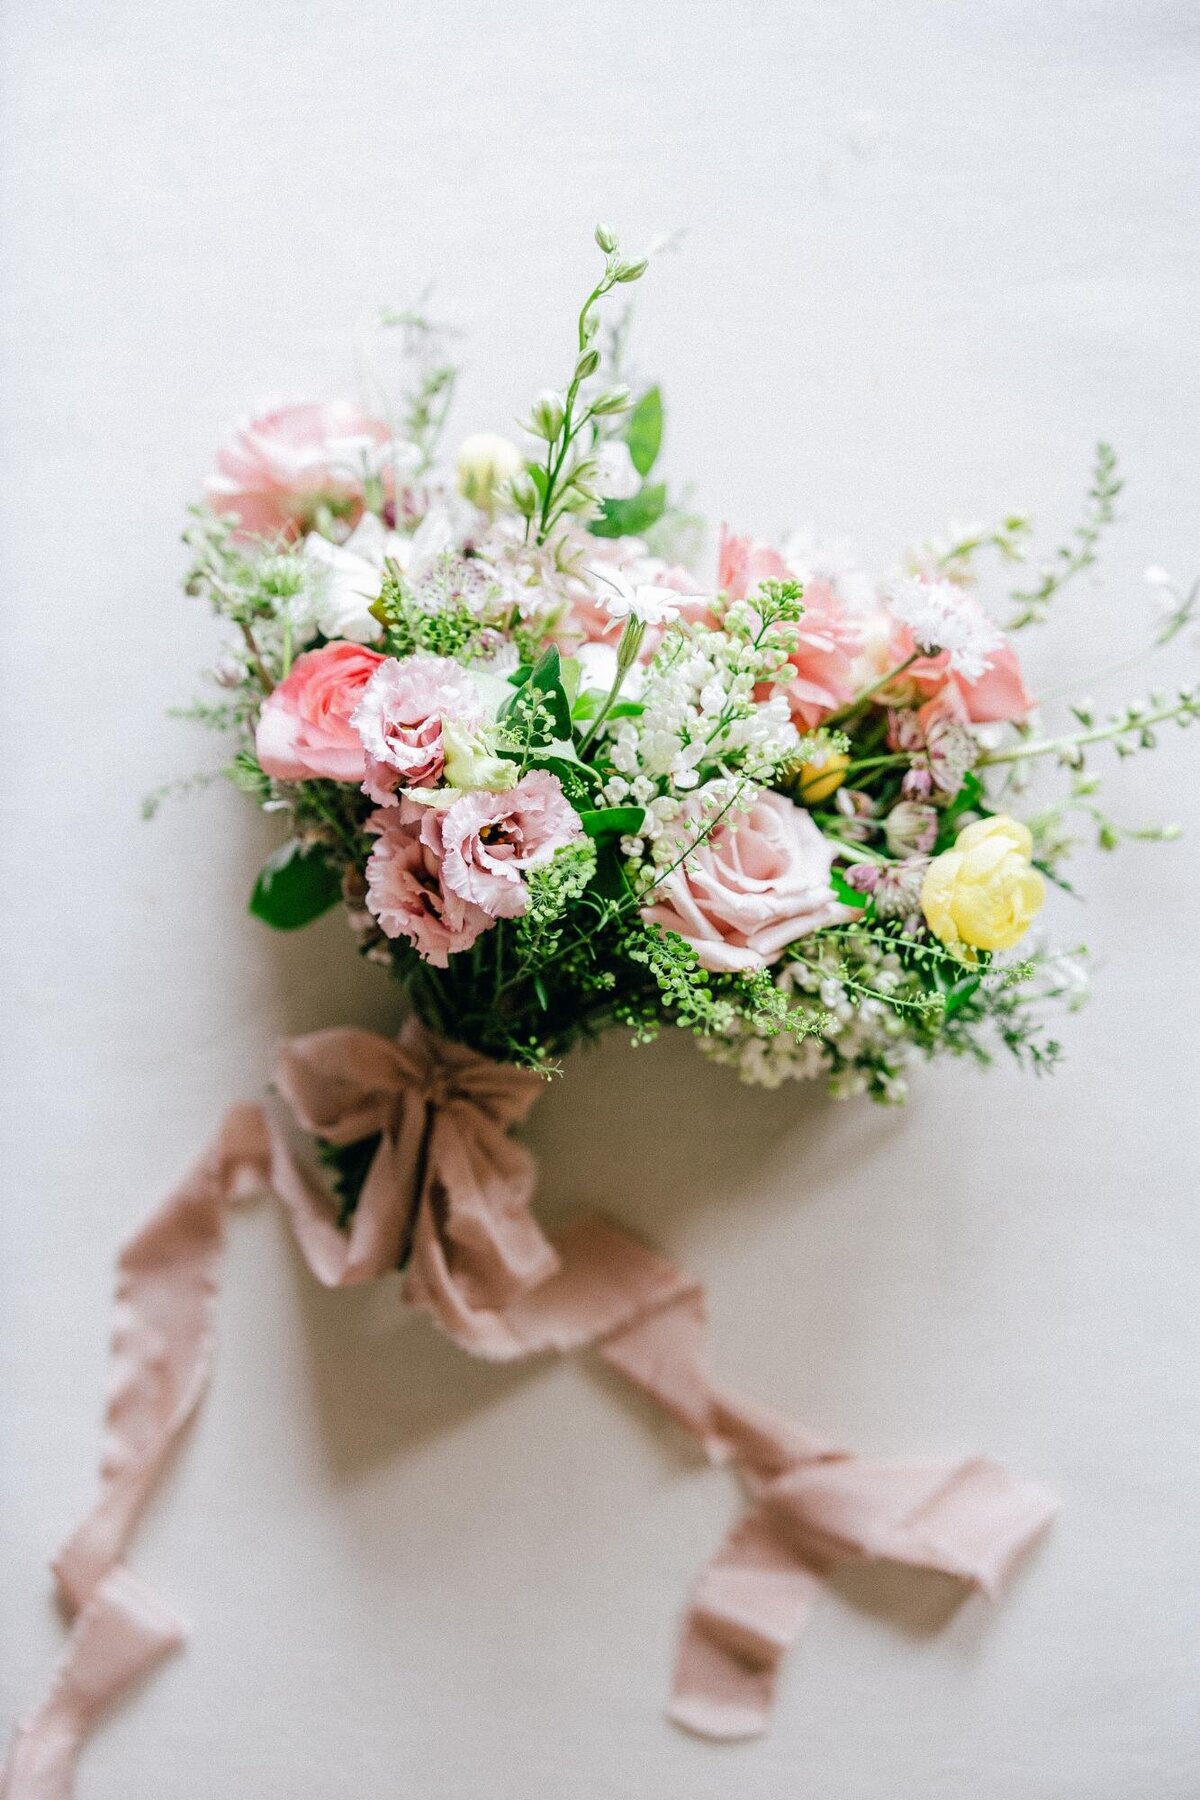 A delicate bouquet of pink and white flowers with greenery and a trailing ribbon against a white background.